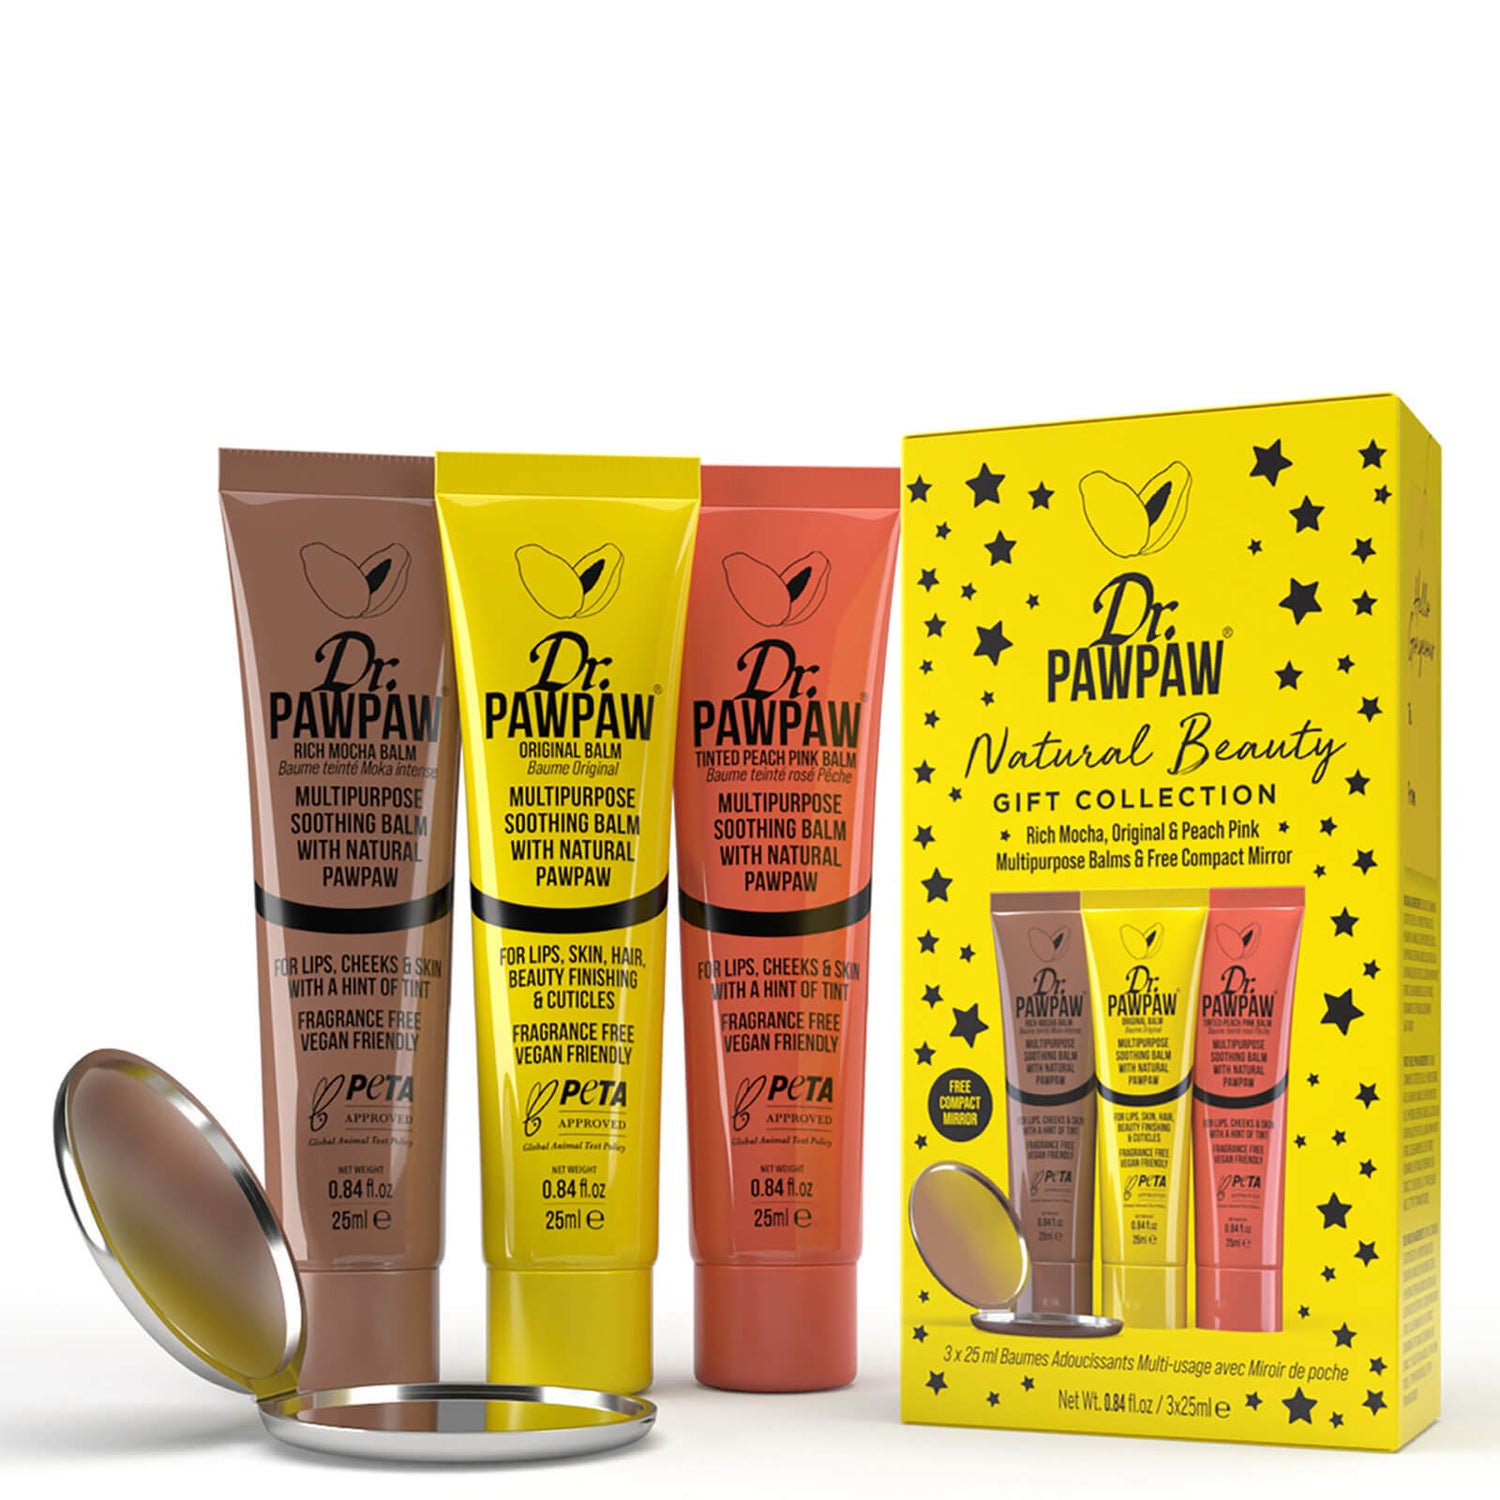 Dr. PAWPAW Christmas Natural Beauty Gift Collection